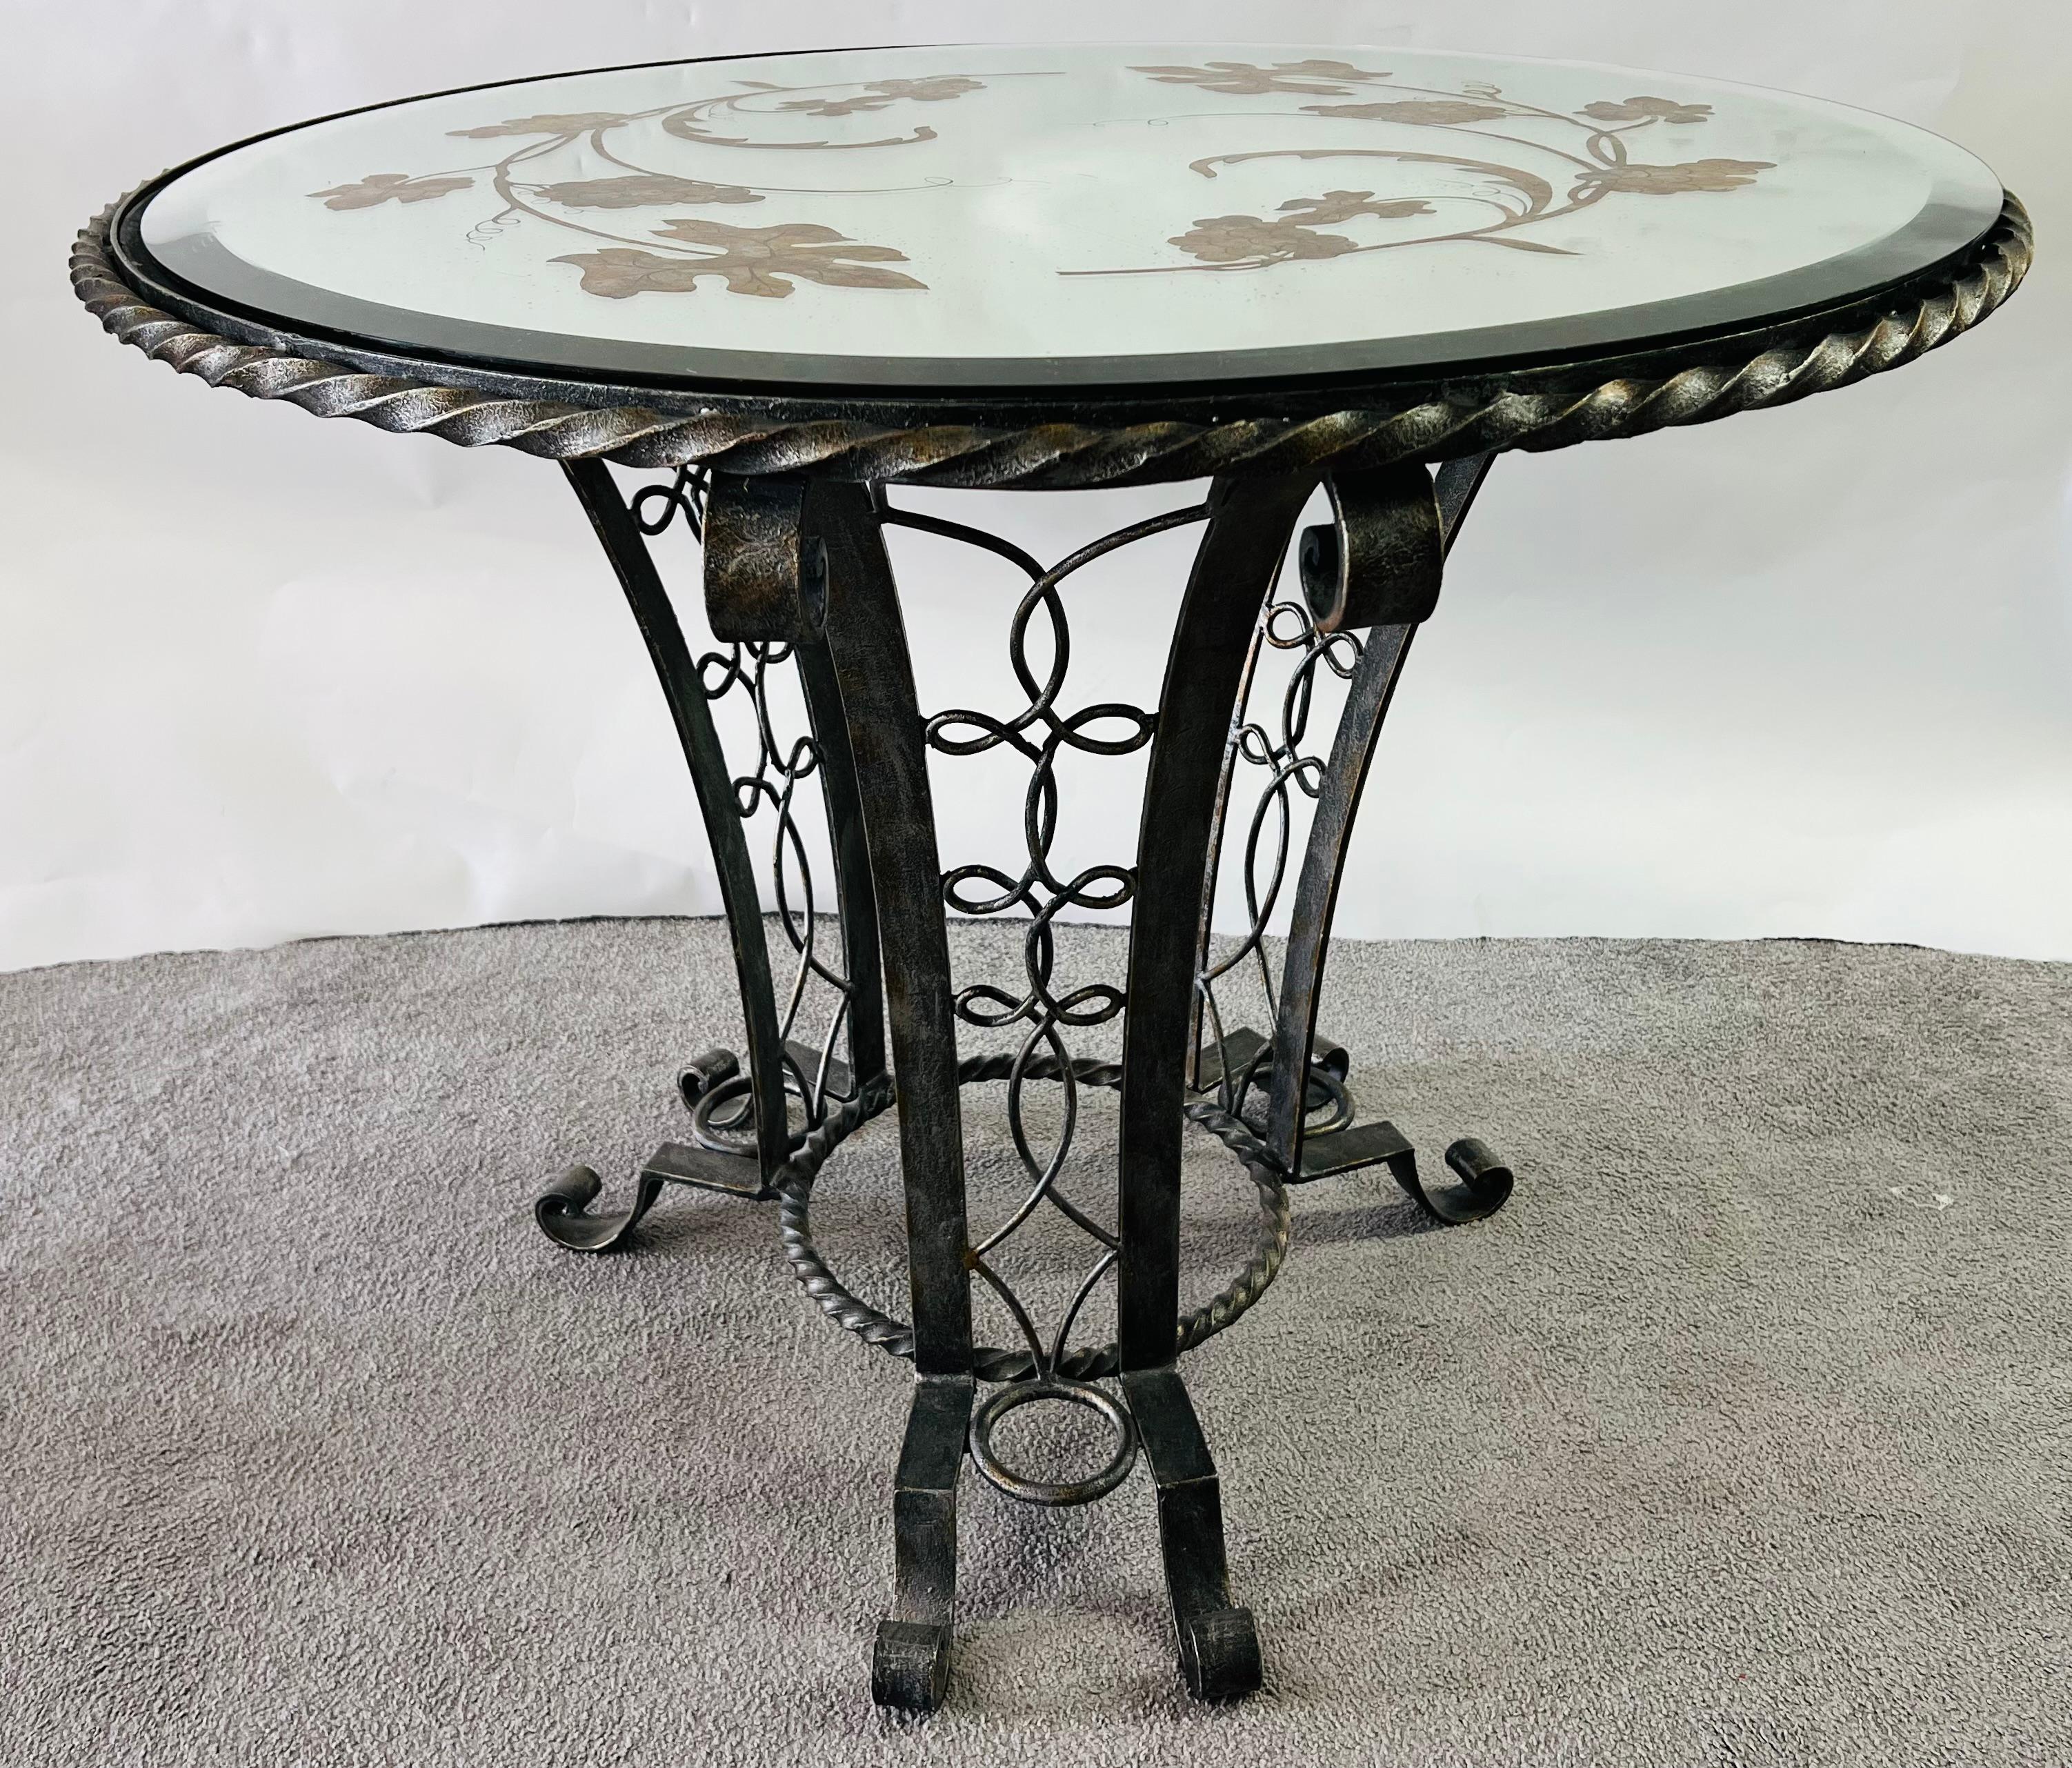 Art Deco wrought Iron center table in the style of Gilbert Poillerat ( French 1902-1988). The table base is finely crafted made of patinated and gilded wrought iron, showing spectacular design and craftsmanship. The distressed mirror top is beveled